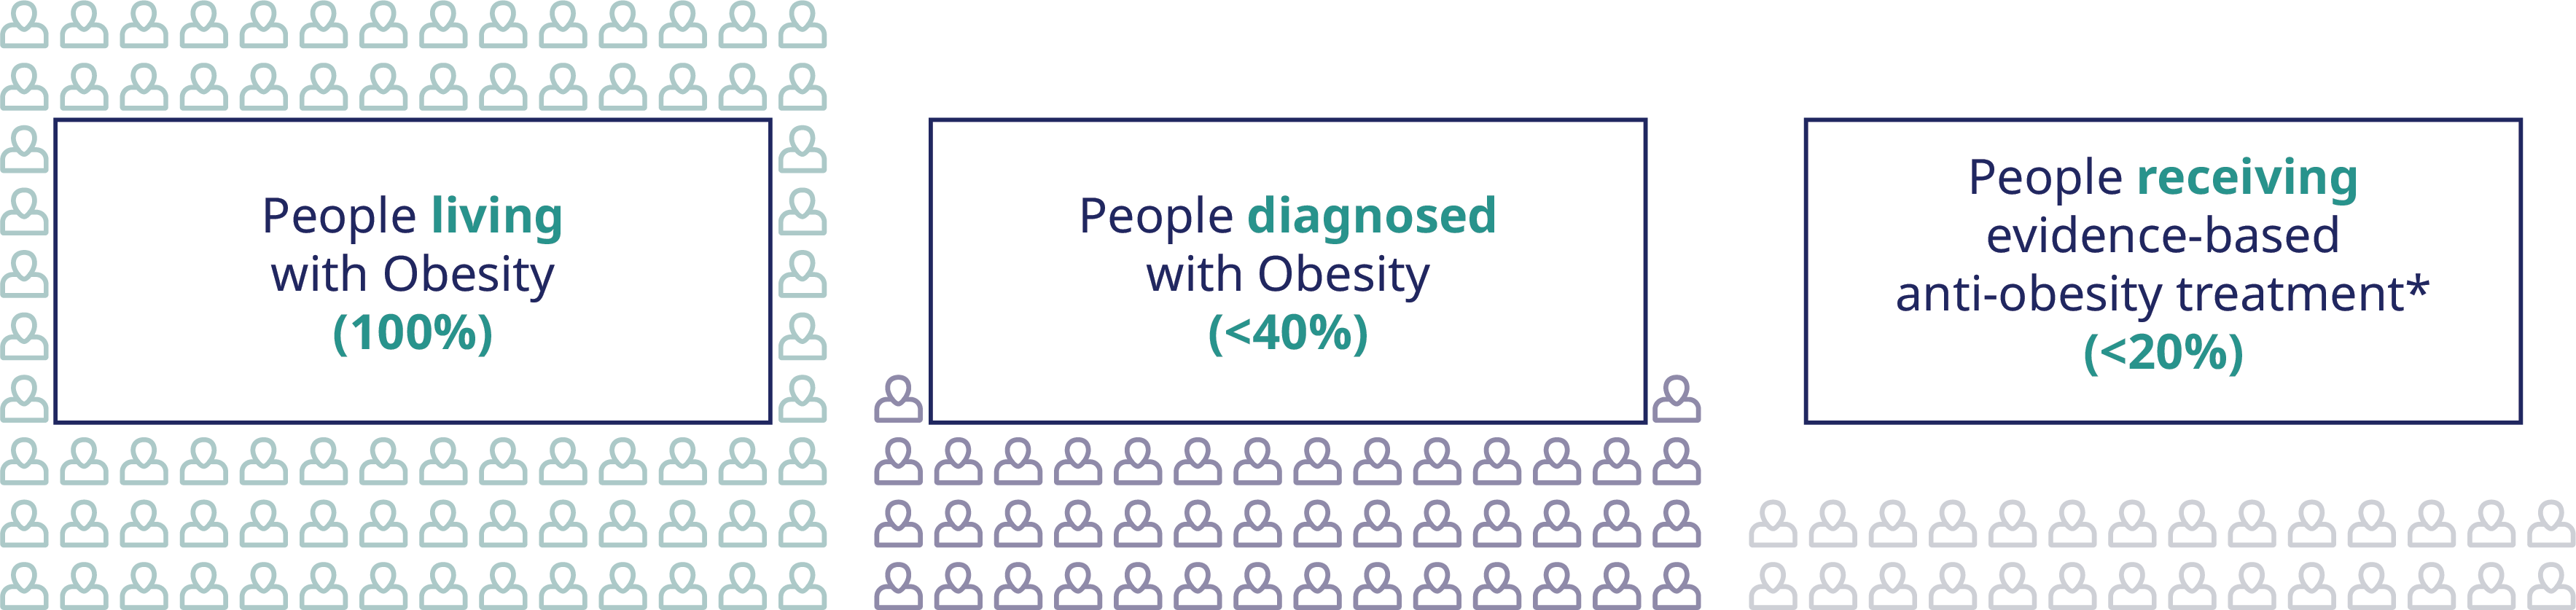 Infographic showing the amount of people receiving anti-obesity treatment.